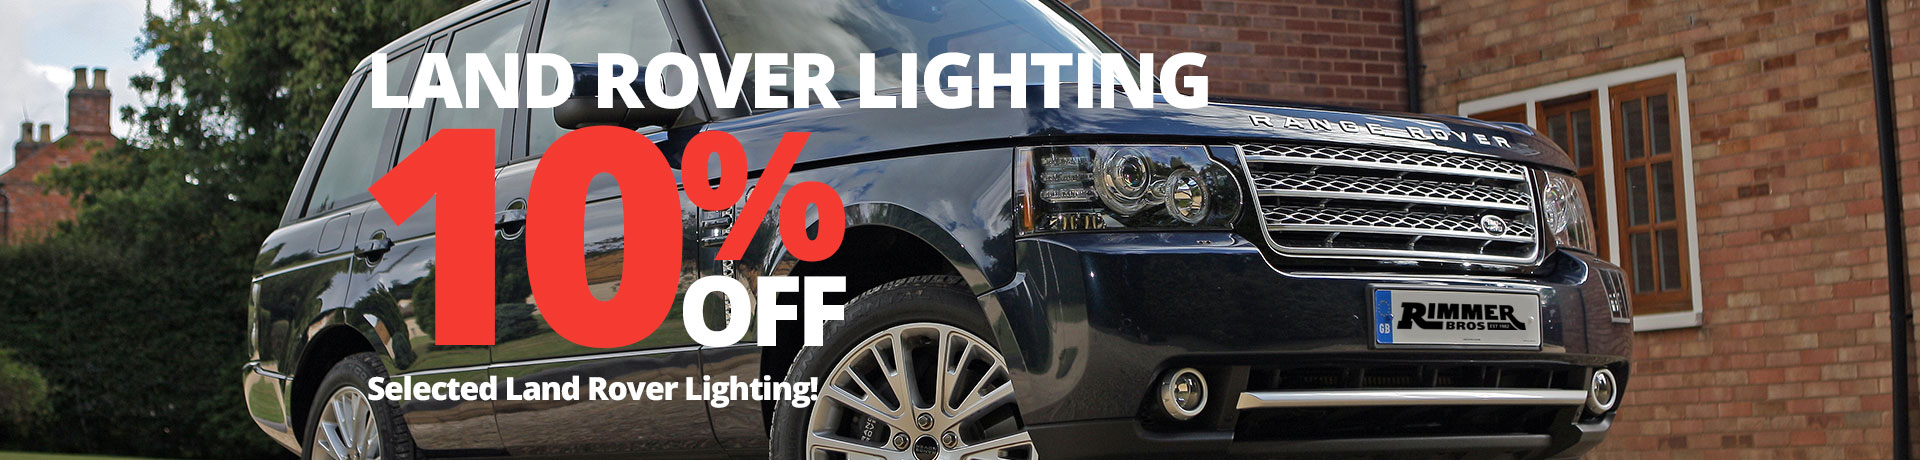 10% off Selected Land Rover Lighting